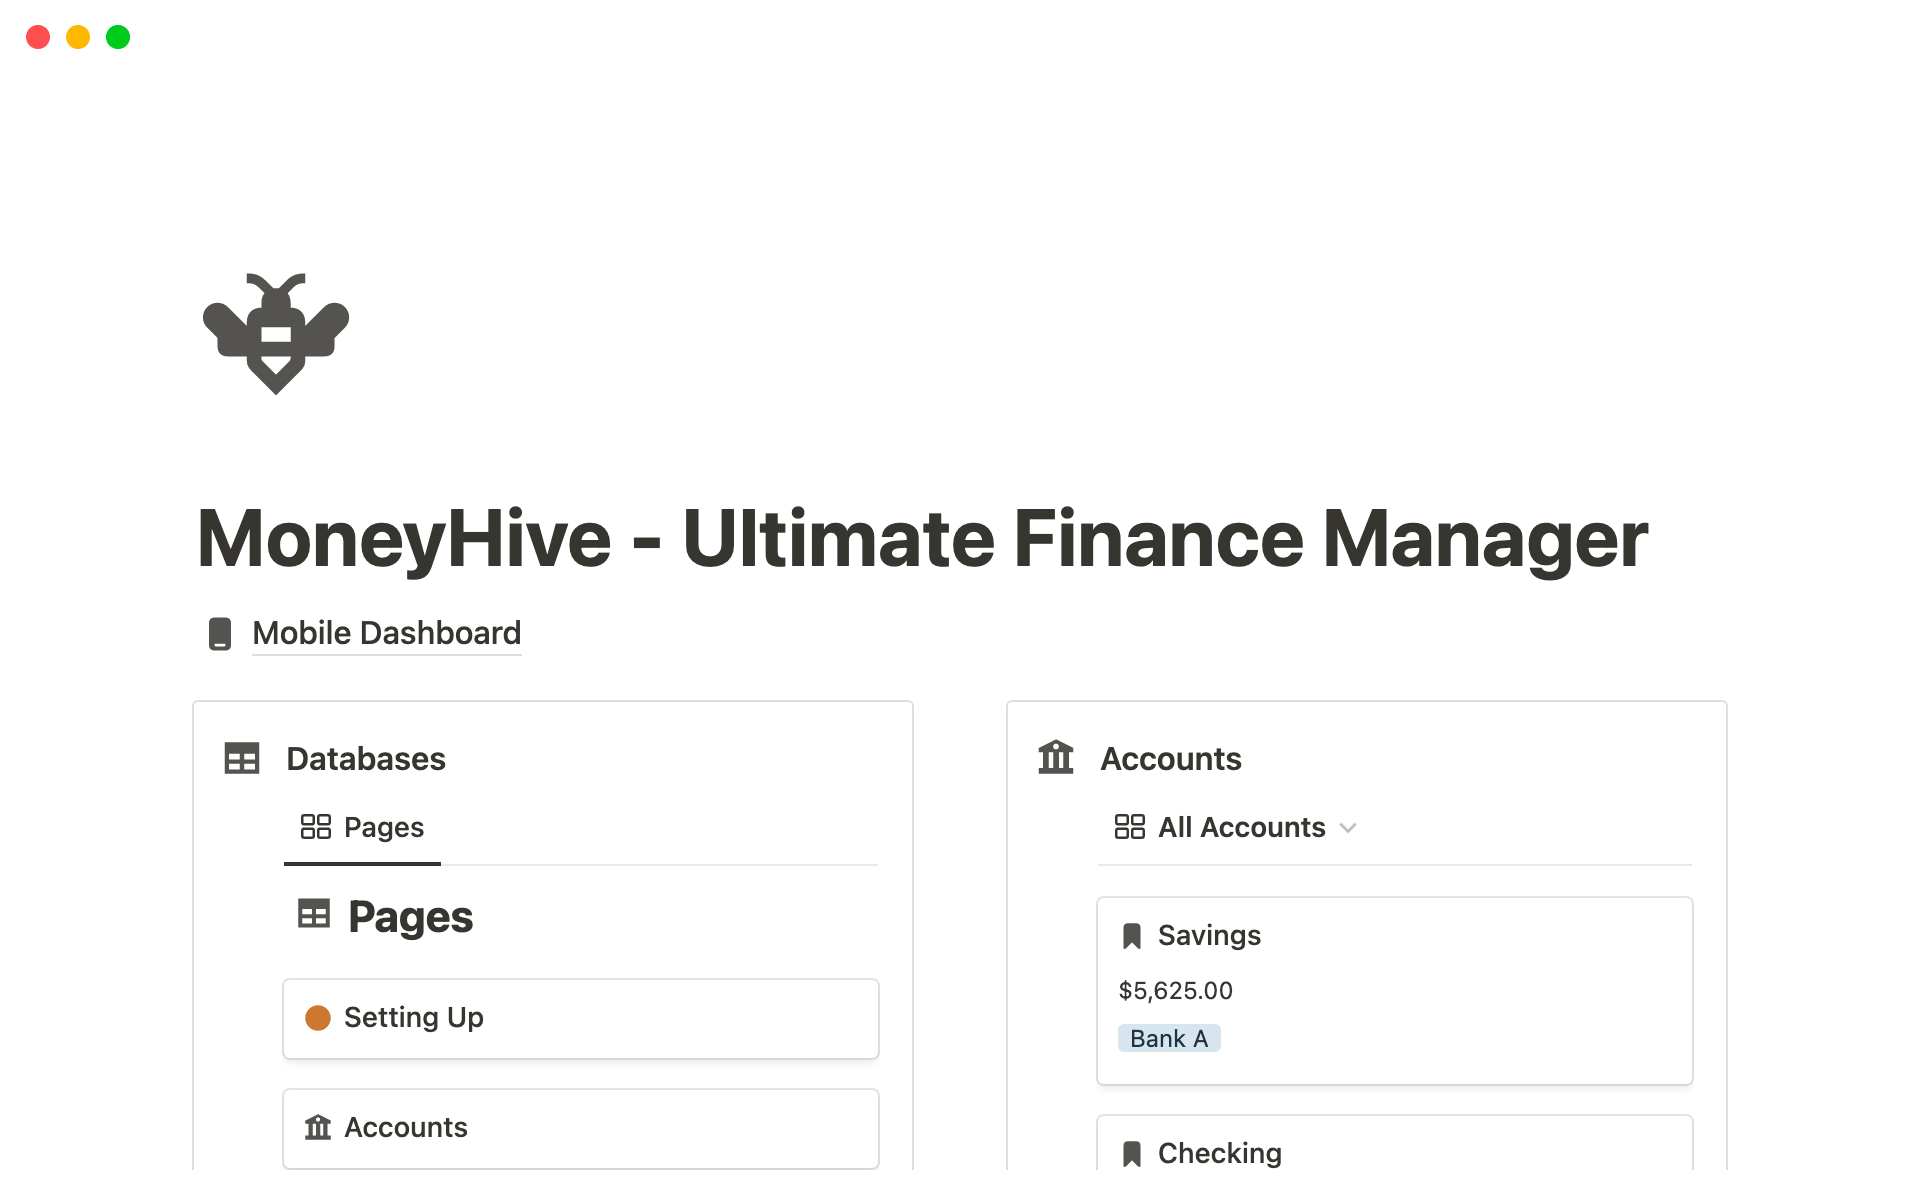 All-in-One Finance Manager with unique features like bills splitting, automatic subscription, etc.